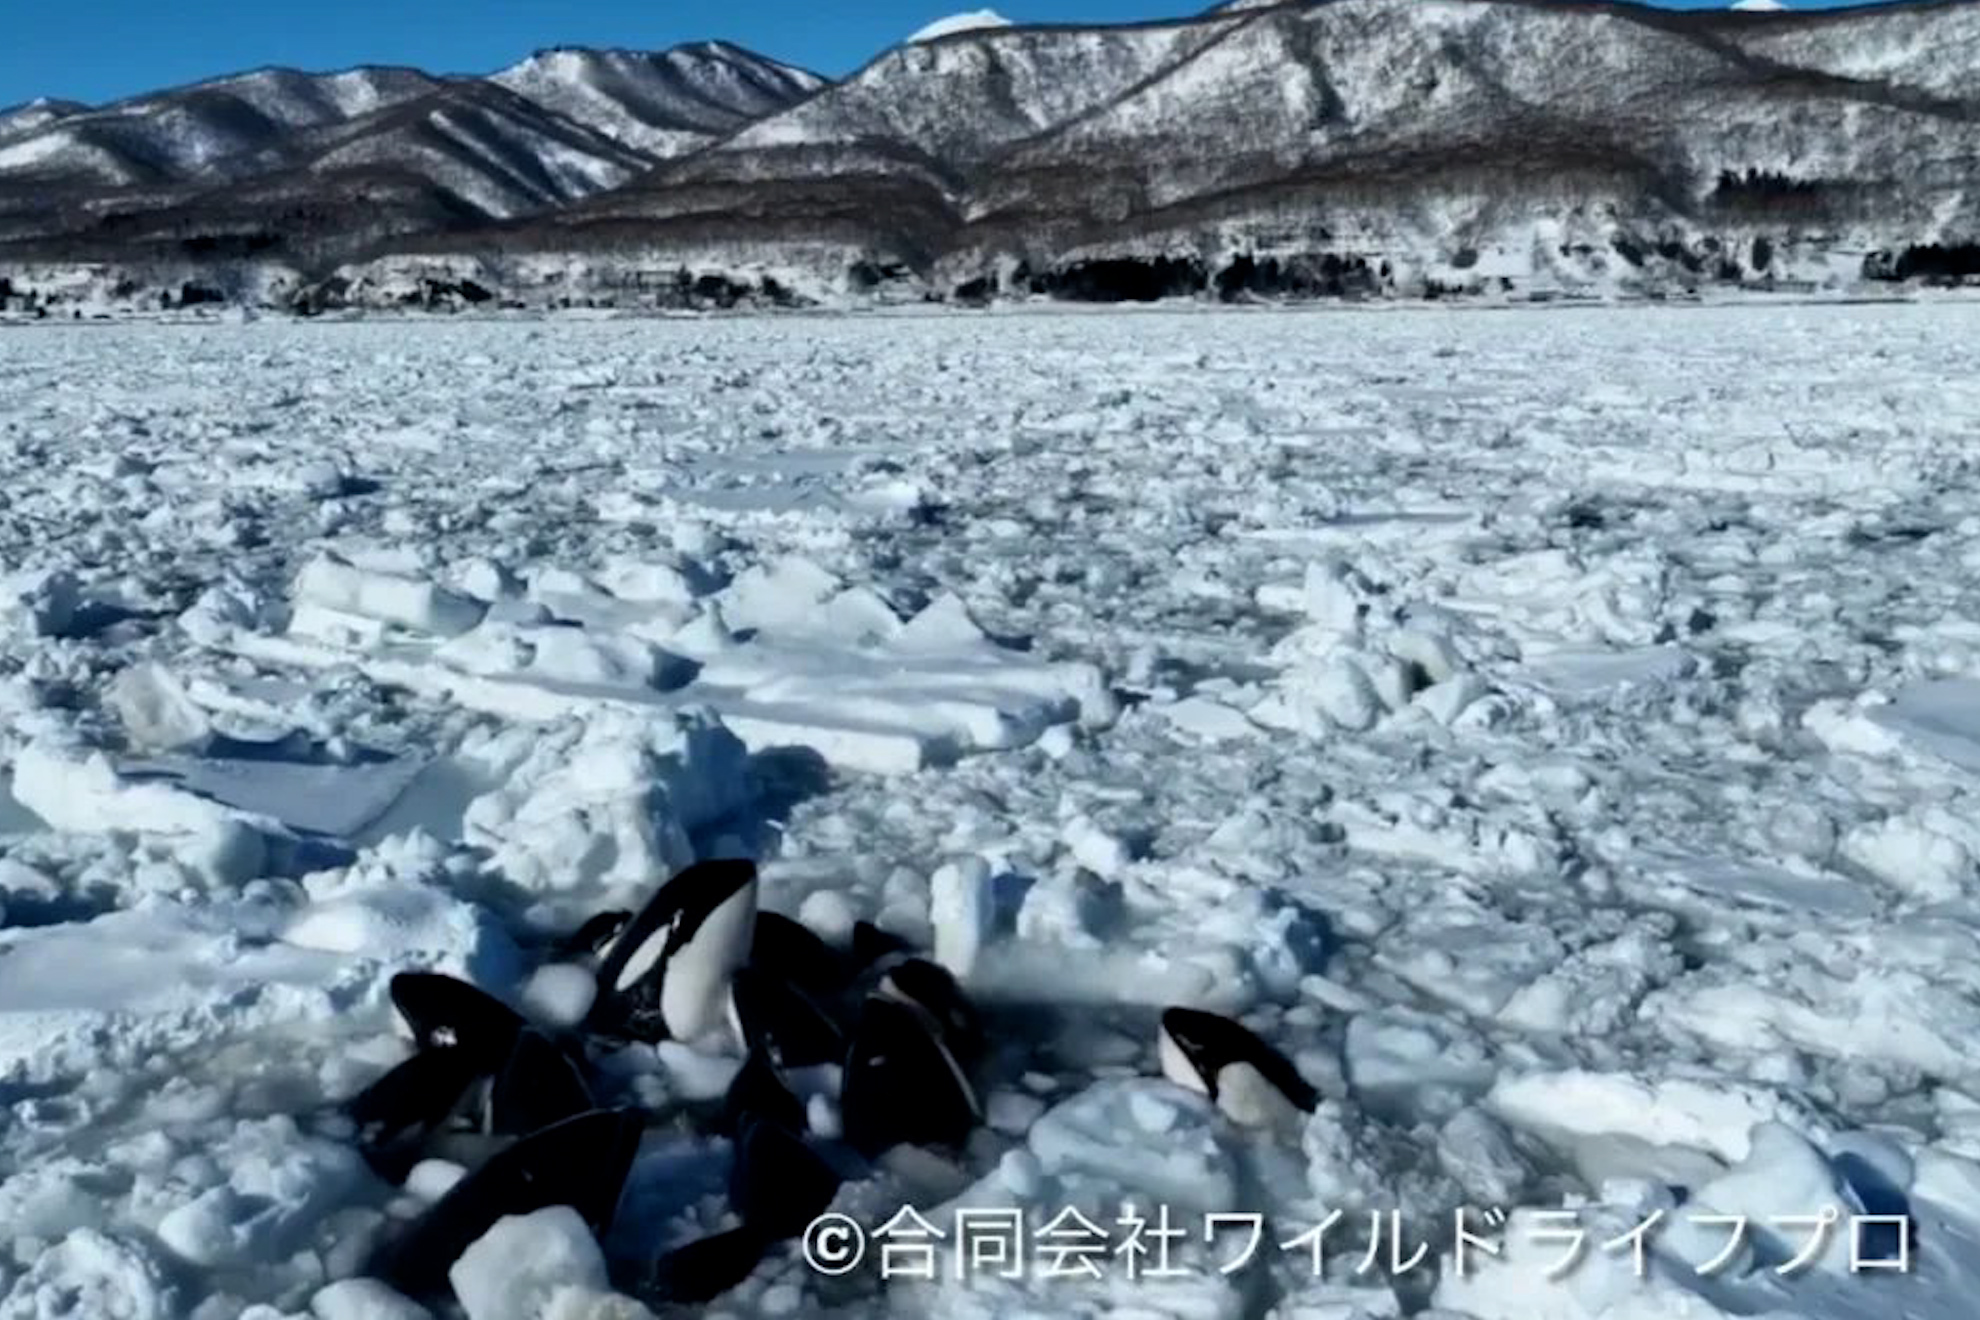 Killer Whales trapped in ice